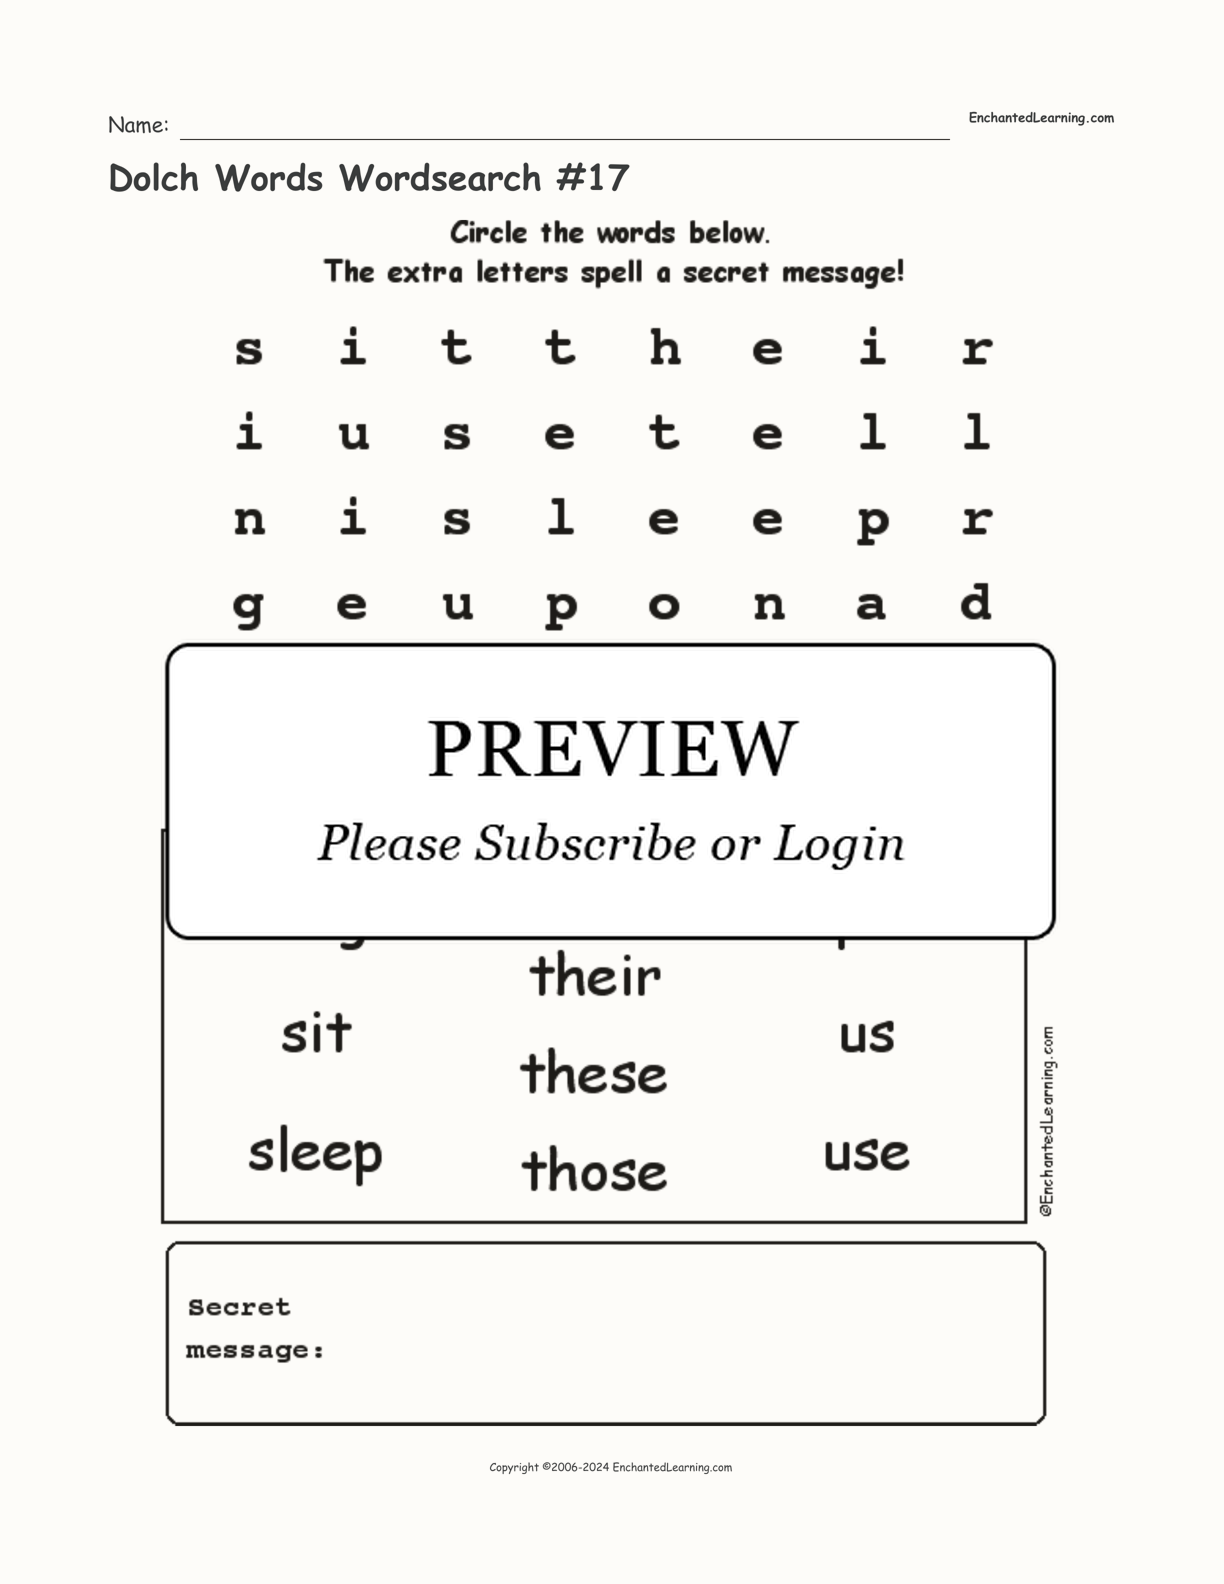 Dolch Words Wordsearch #17 interactive worksheet page 1